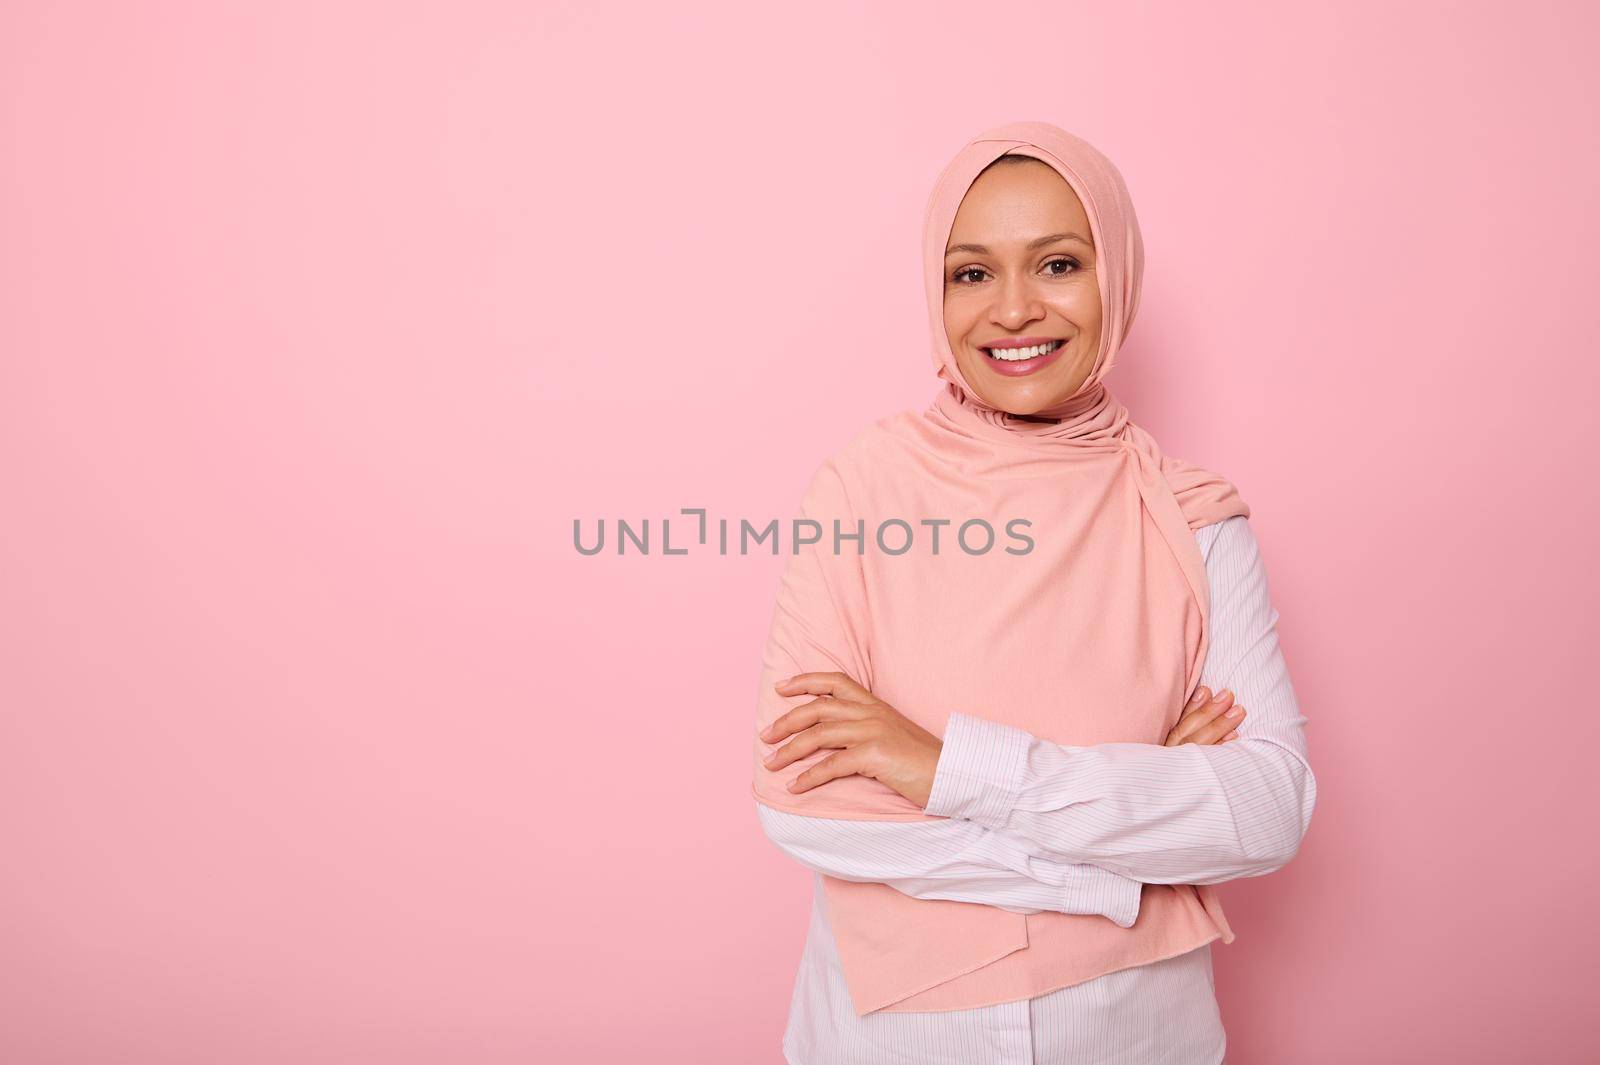 Arab Muslim lady wearing a hijab crossing arms, smiling with beautiful toothy smile, poses on pink background with copy space looking at camera. Concept of successful confident islamic modern woman